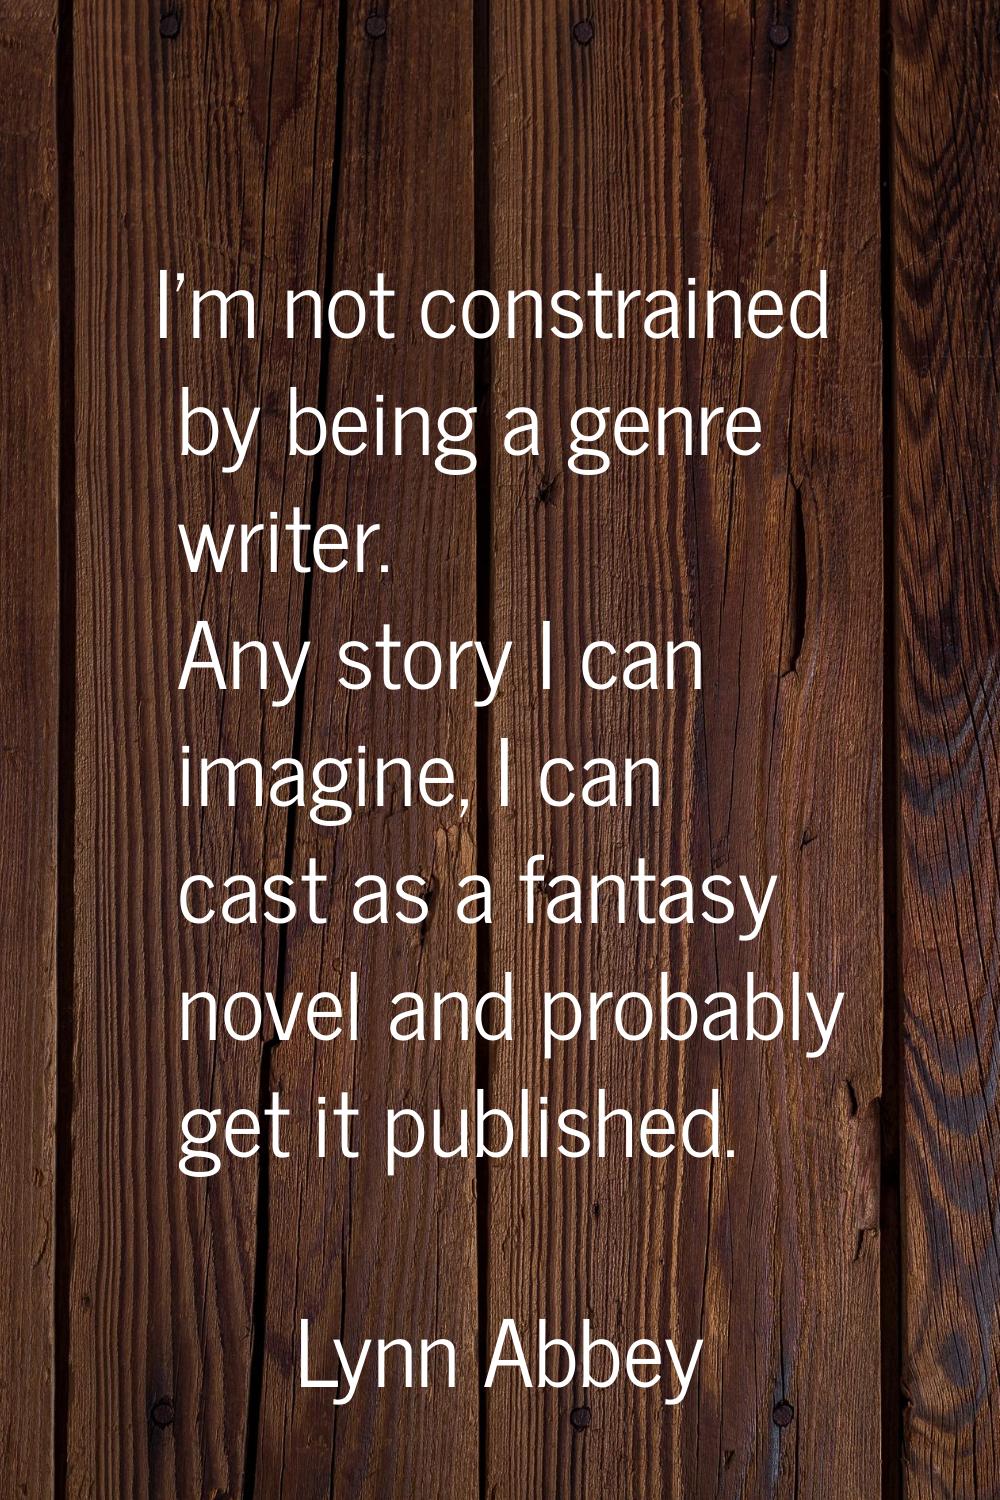 I'm not constrained by being a genre writer. Any story I can imagine, I can cast as a fantasy novel